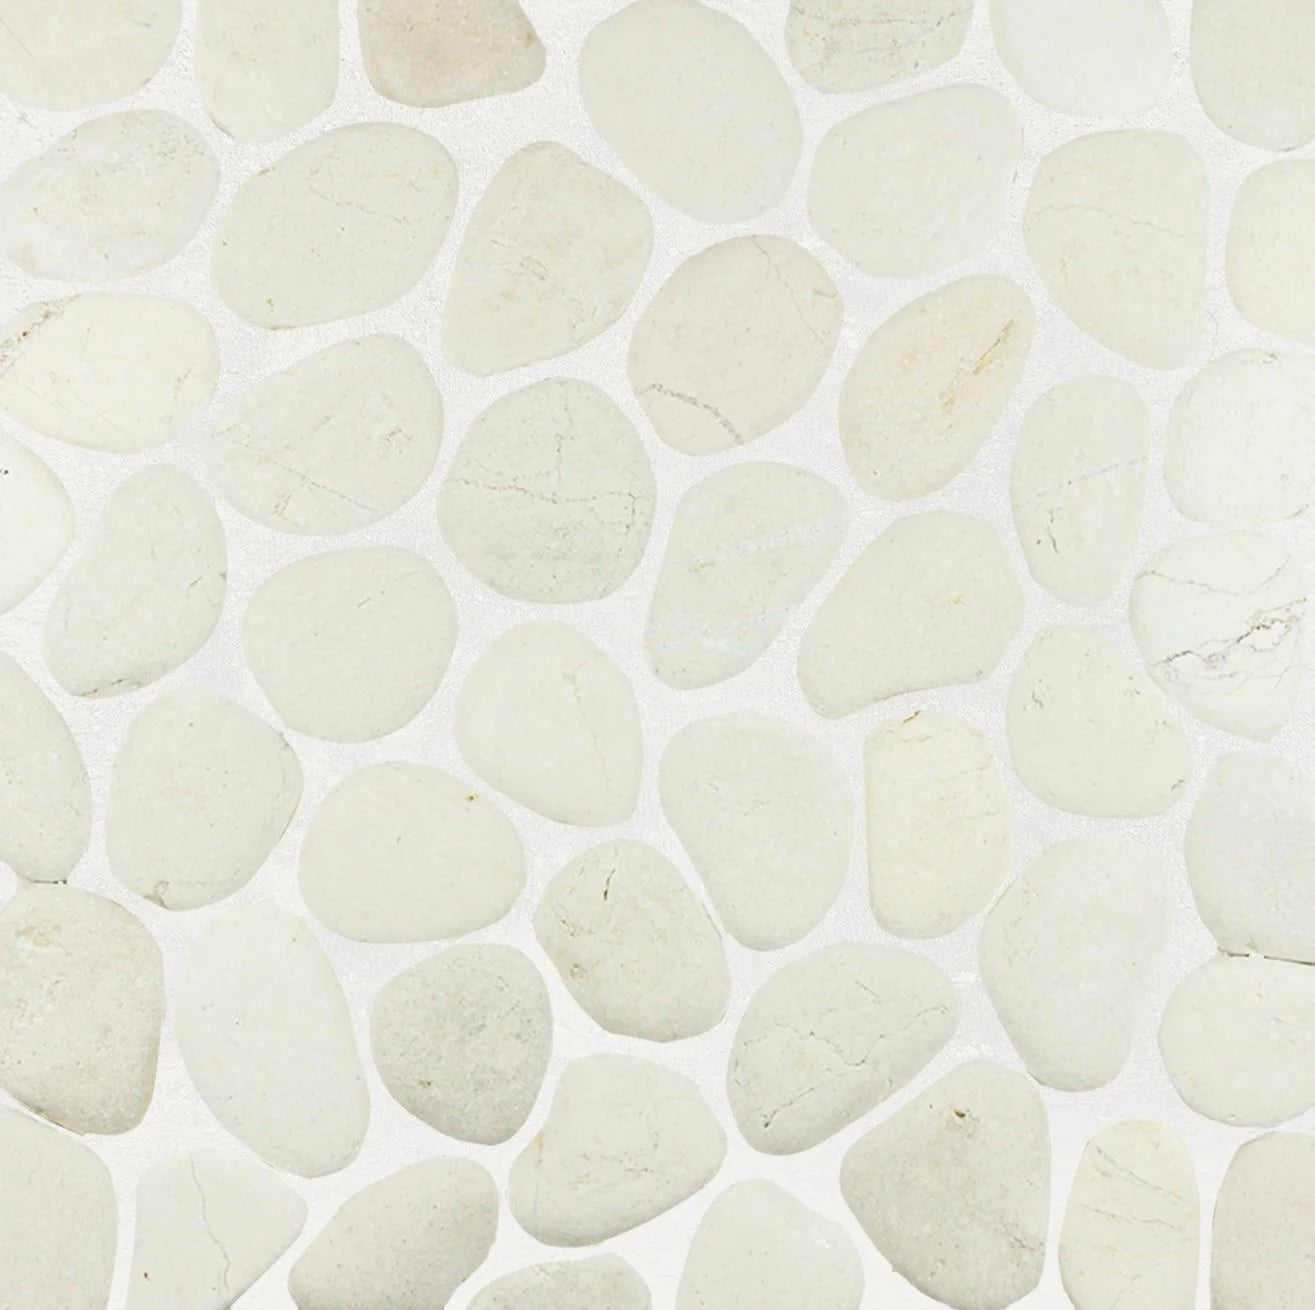 white pebble tile sample close up with grout